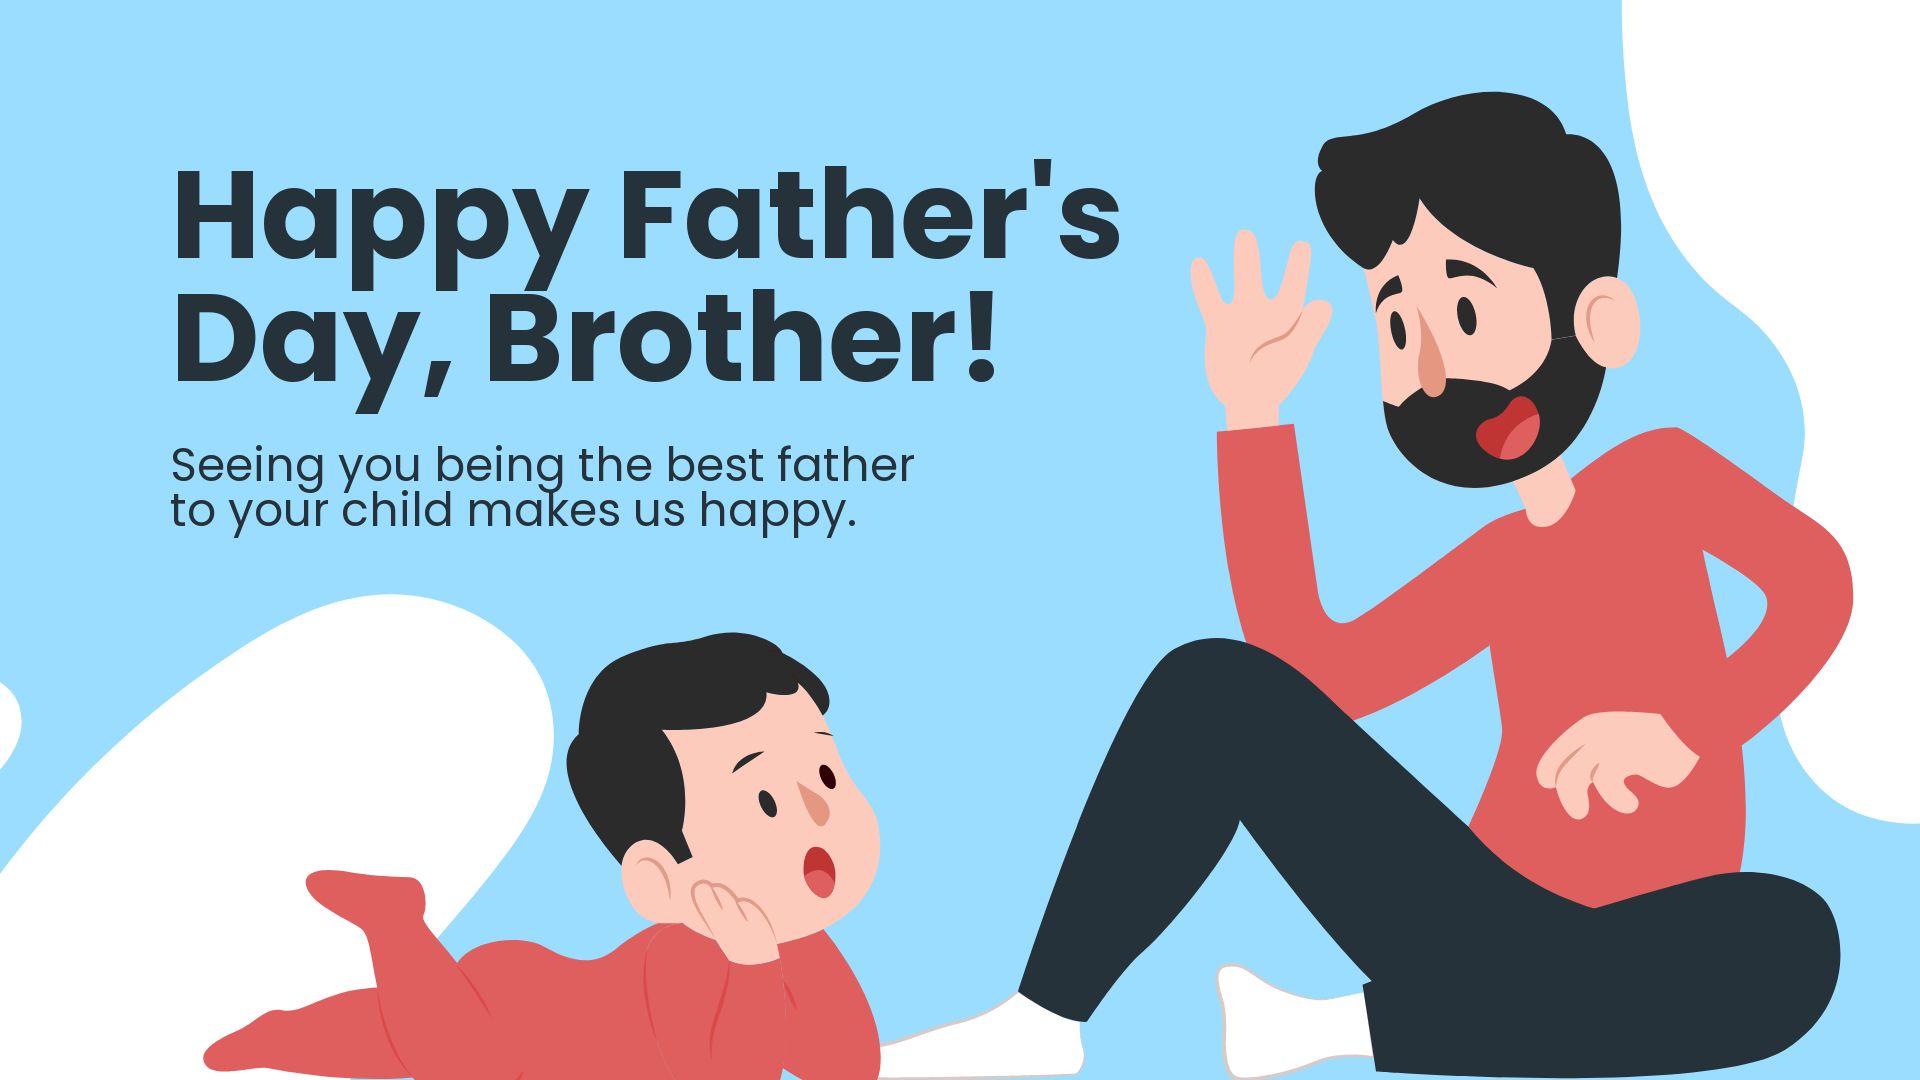 Happy Father's Day Brother Image in JPG Download